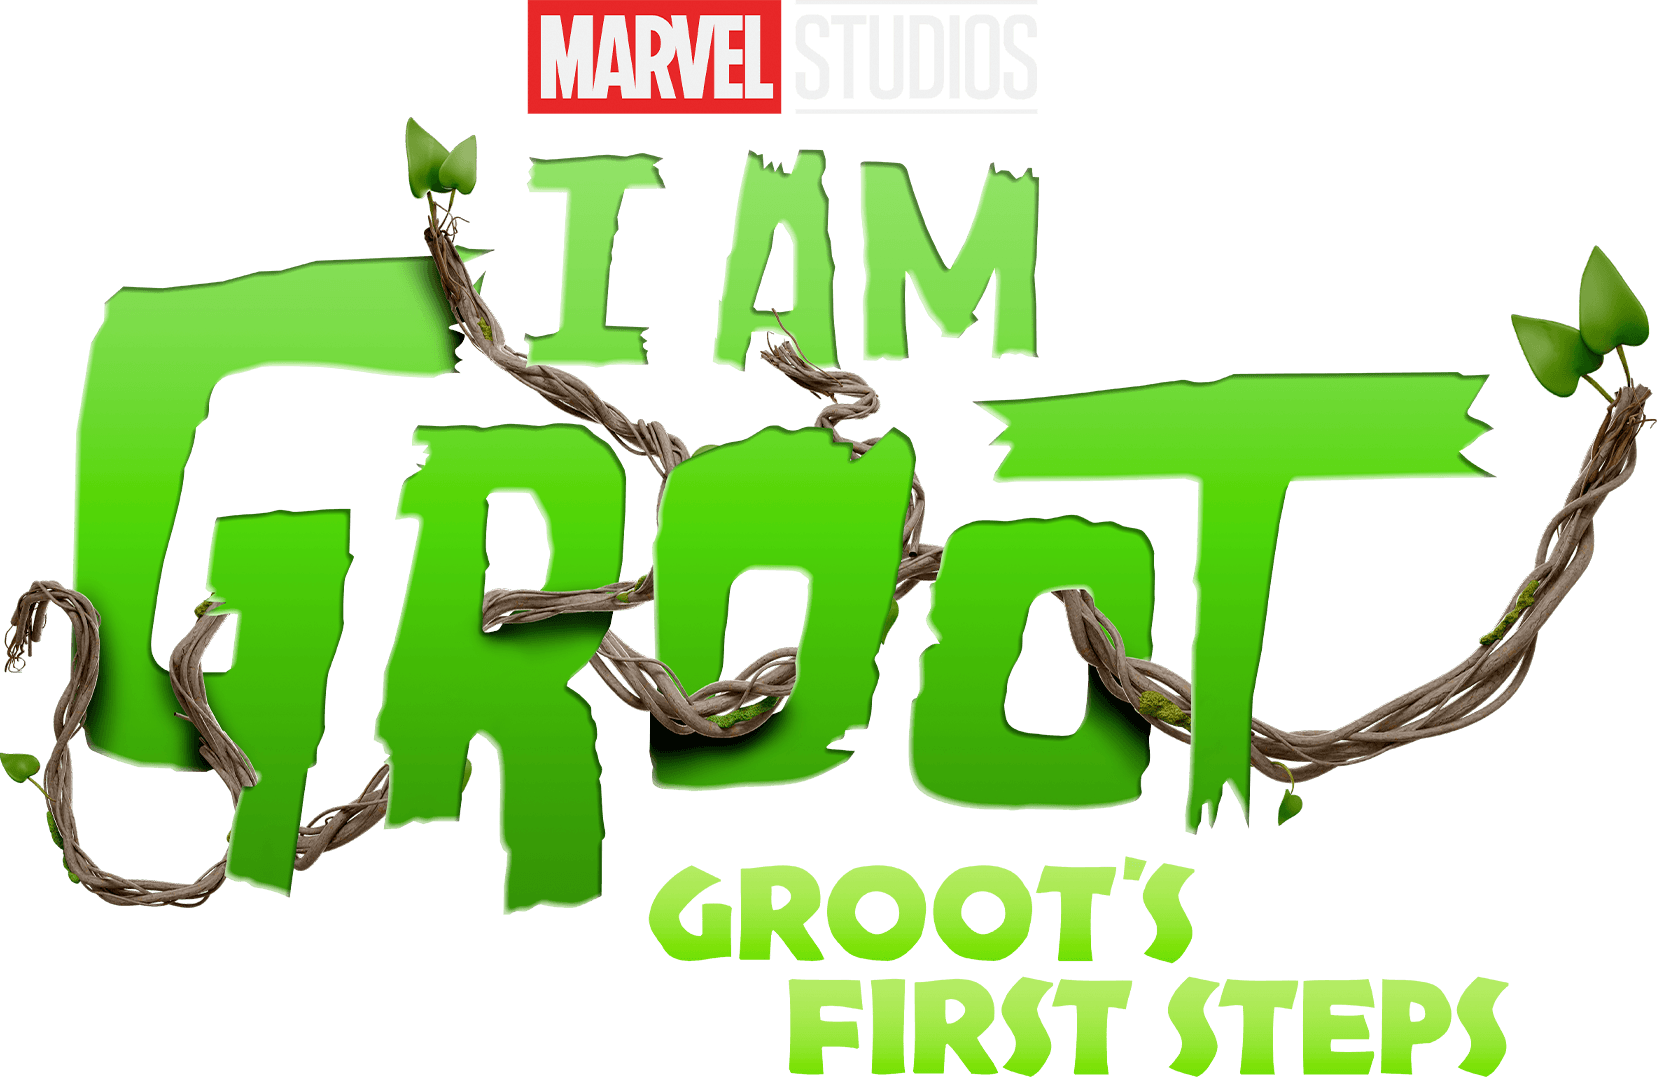 Groot's First Steps logo